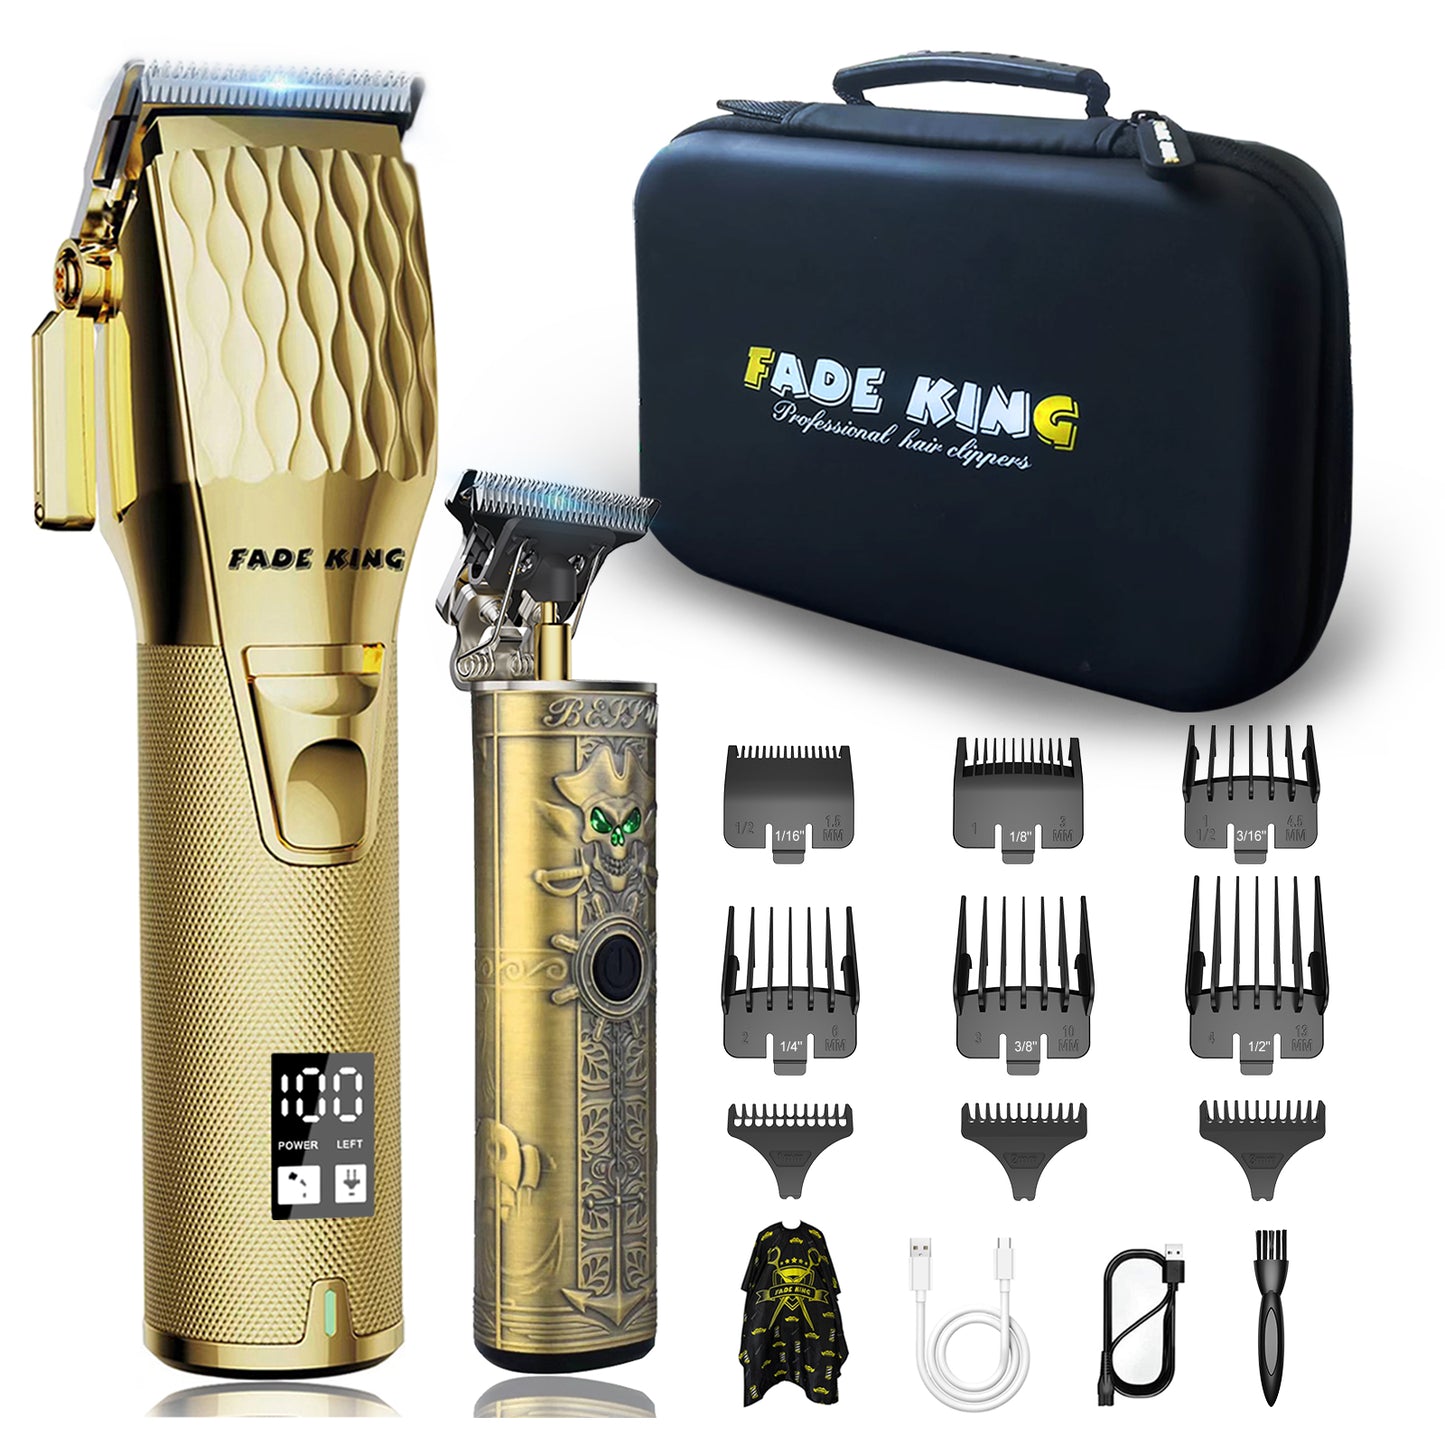 FADEKING Professional Men's Hair Clippers and Trimmer Set - Cordless Hair Clippers for Men, LCD Display Barber Clippers for Hair Cutting, Rechargable Beard T Outliner Trimmers Haircut Grooming Kit